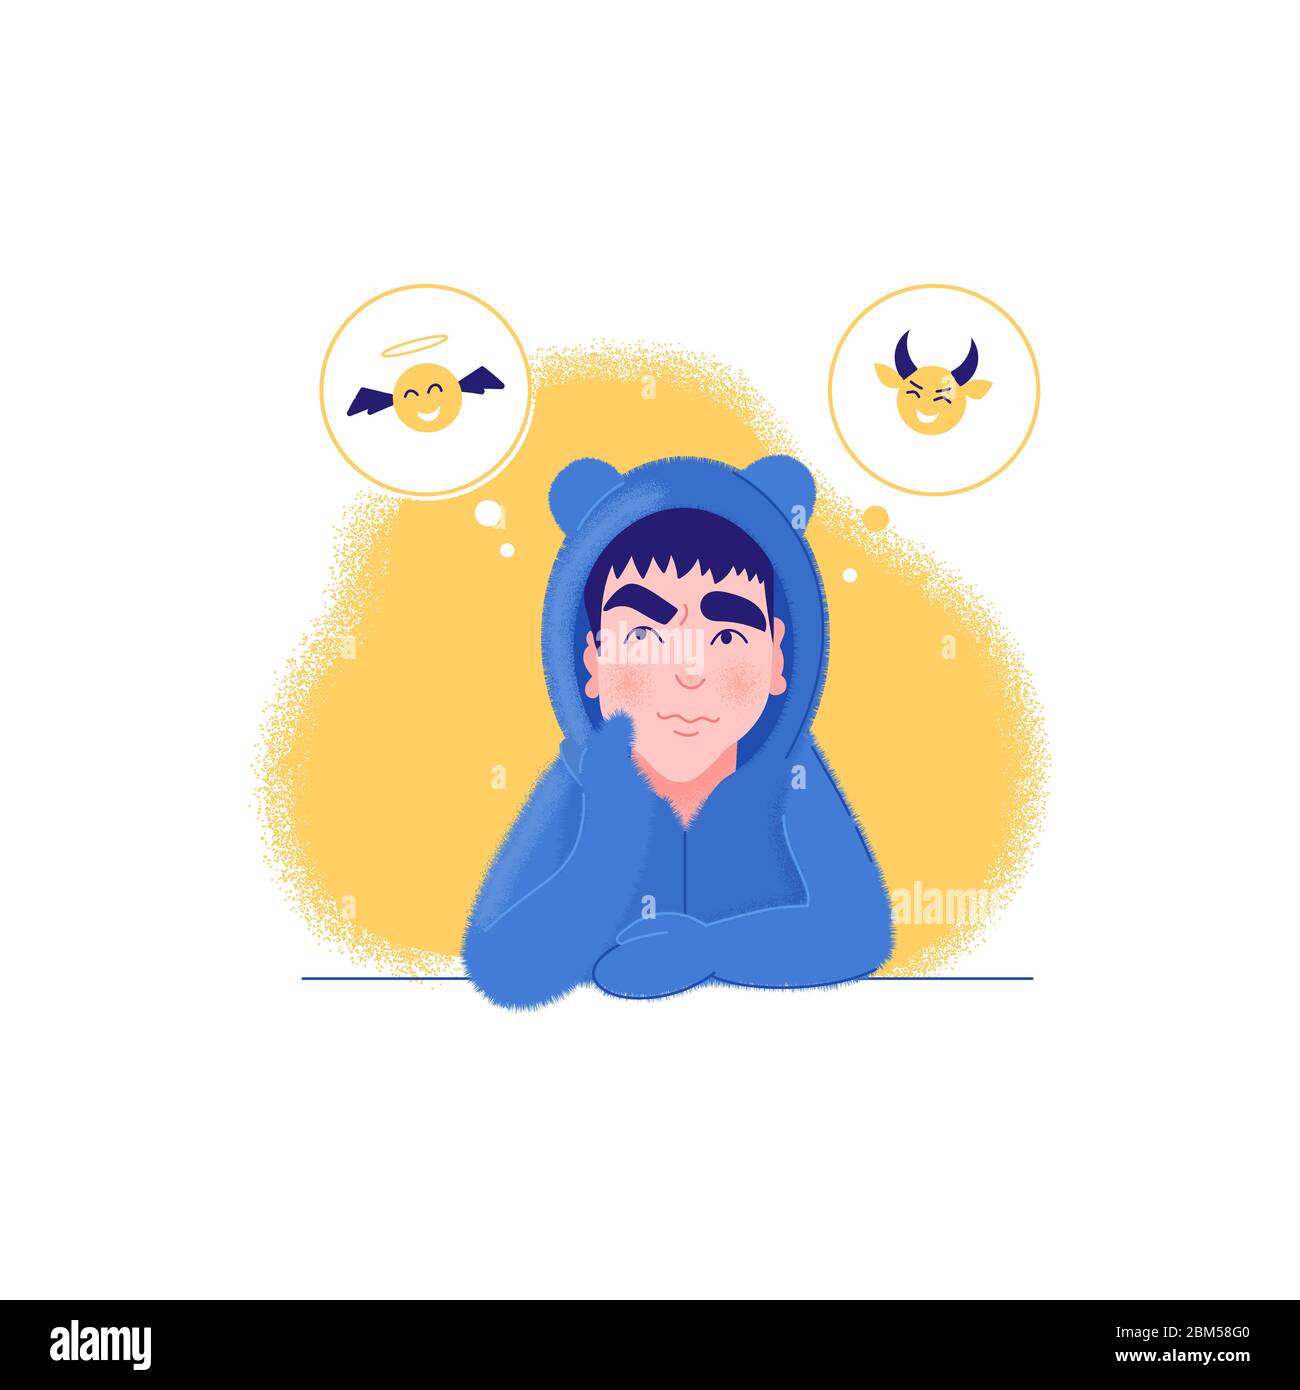 Man in pensive mood wearing blue bear costume. Contradiction concept. Stock Vector